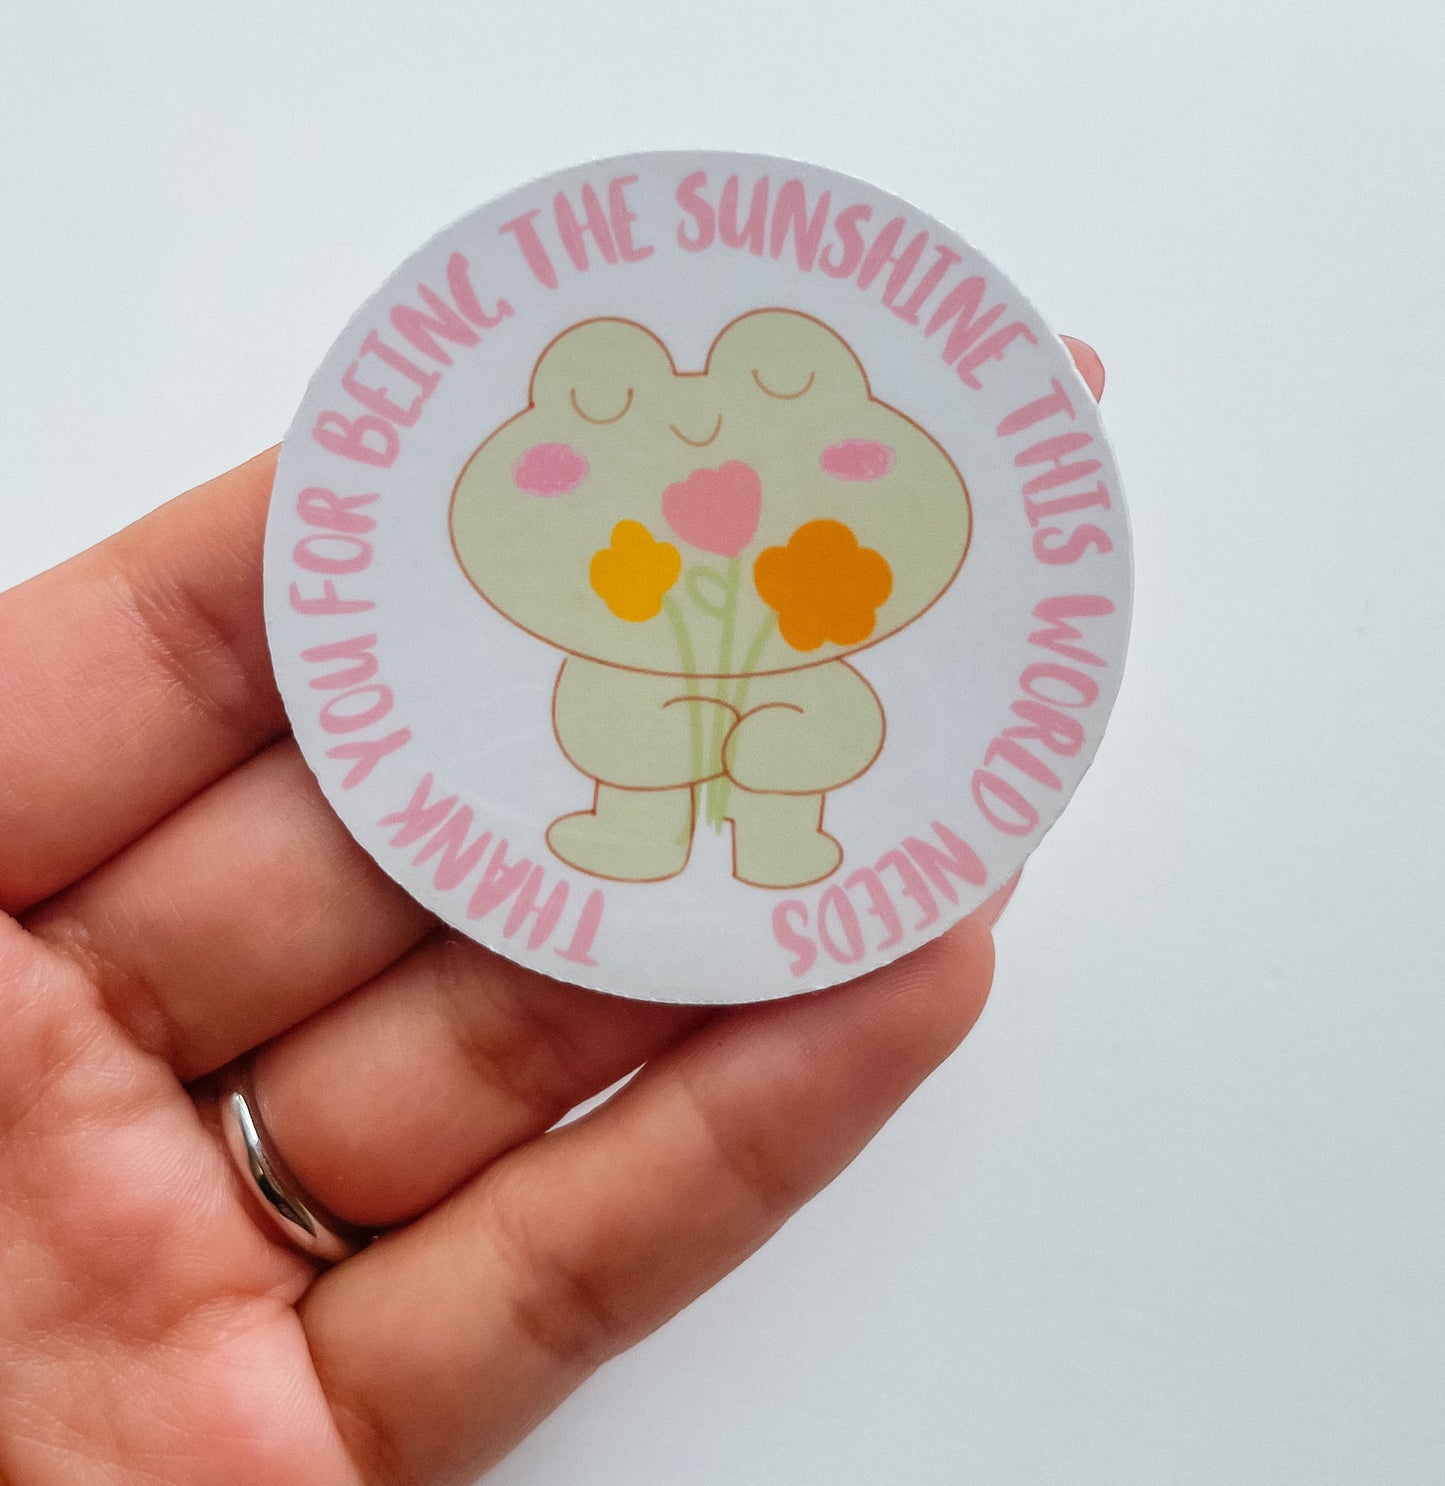 Thank You For Being The Sunshine Sticker